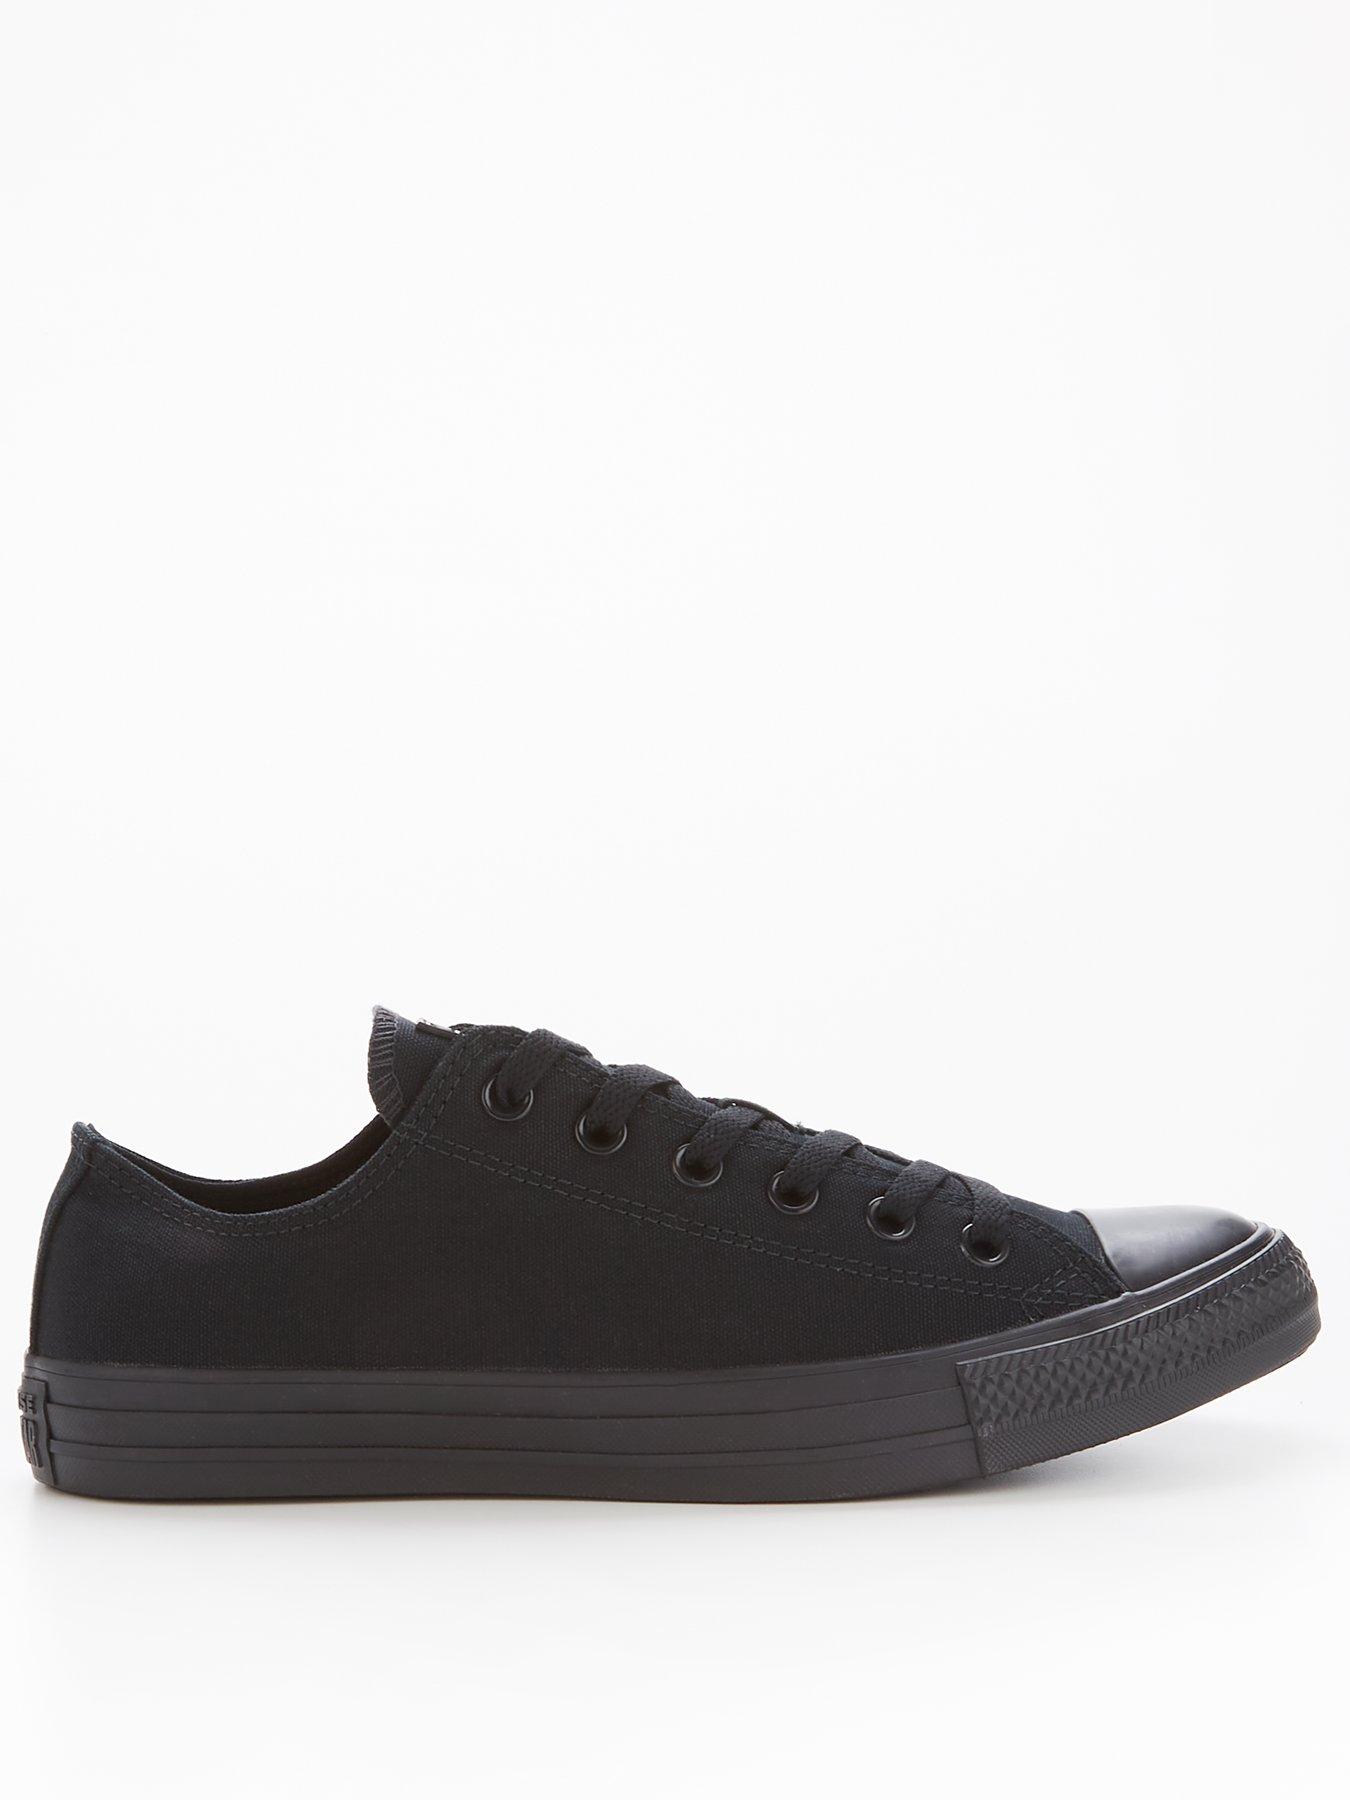 Converse Chuck Taylor All Star Ox - Black | very.co.uk